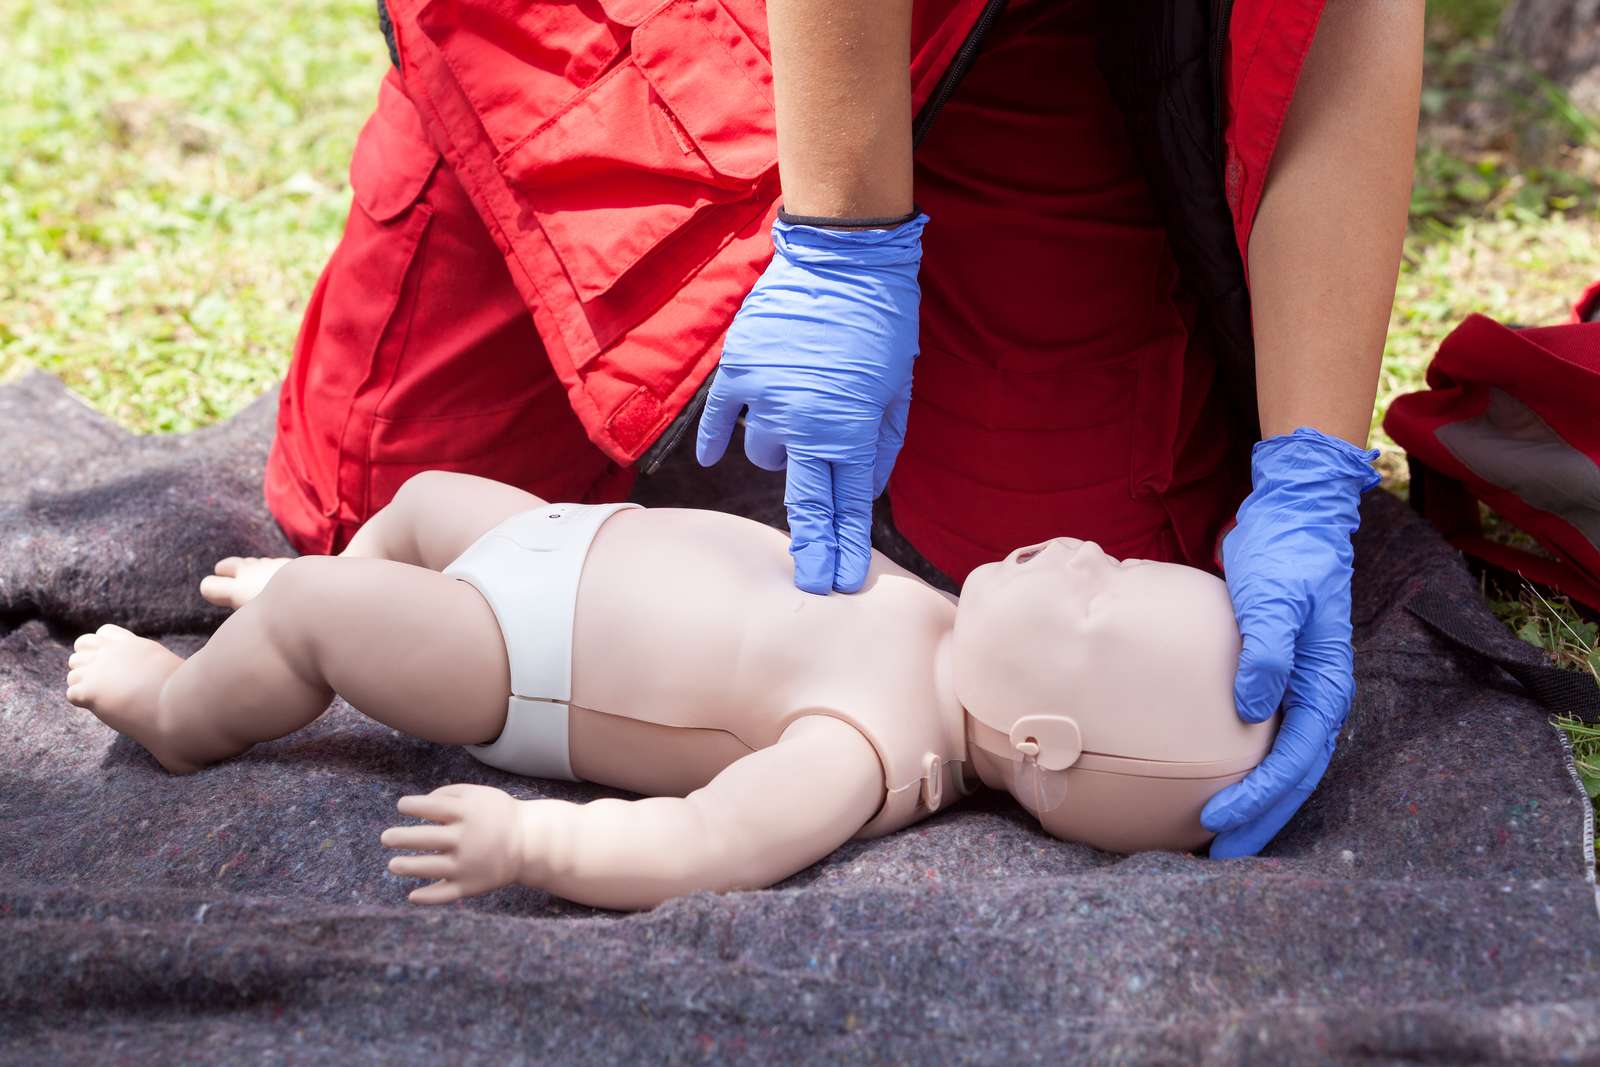 Paramedic performing CPR on baby dummy with two-finger chest compression